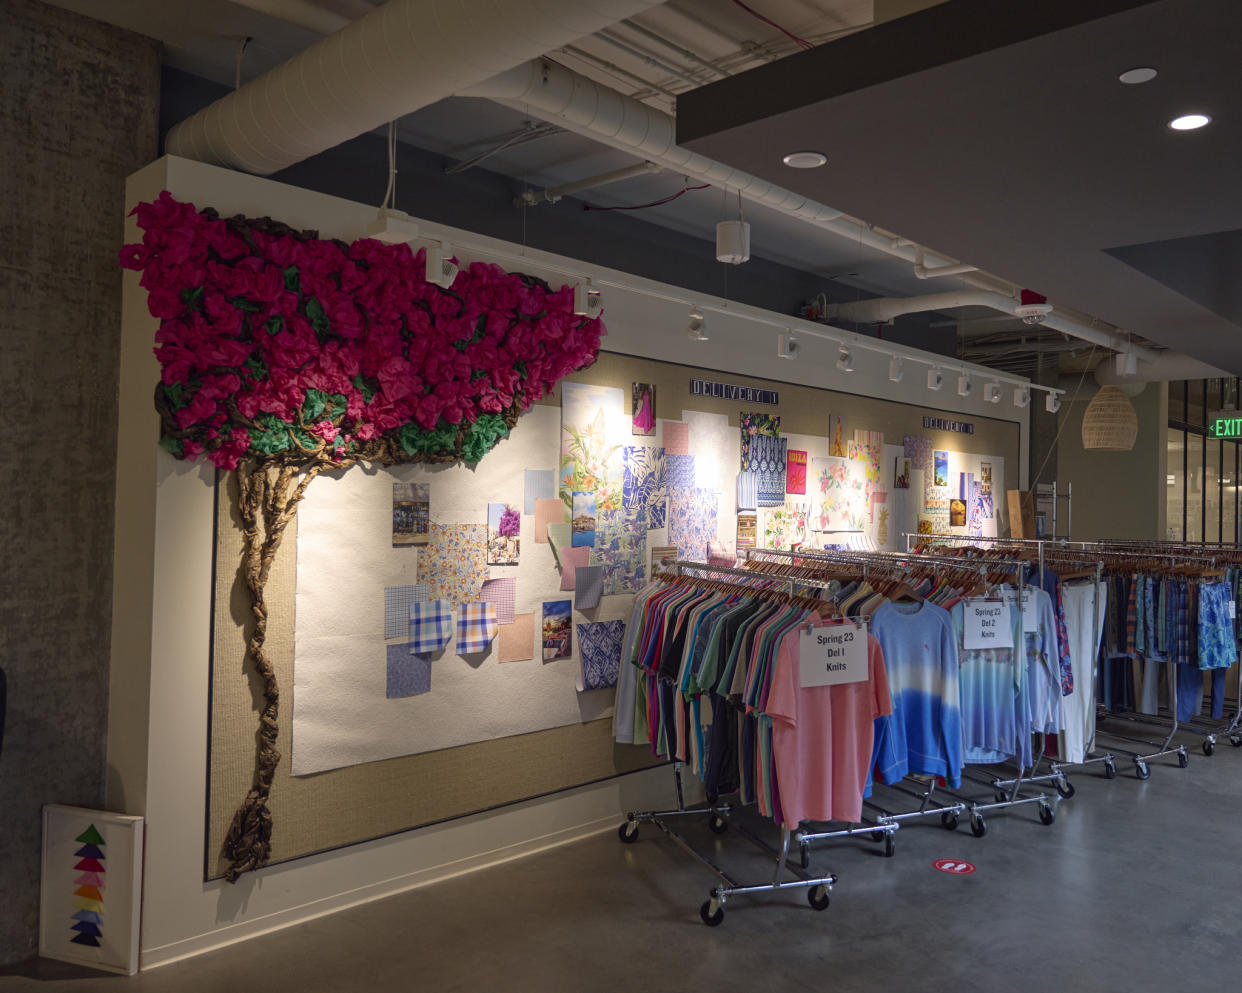 Merchandise on display at Tommy Bahama’s Seattle headquarters. - Credit: Meron Menghistab/WWD